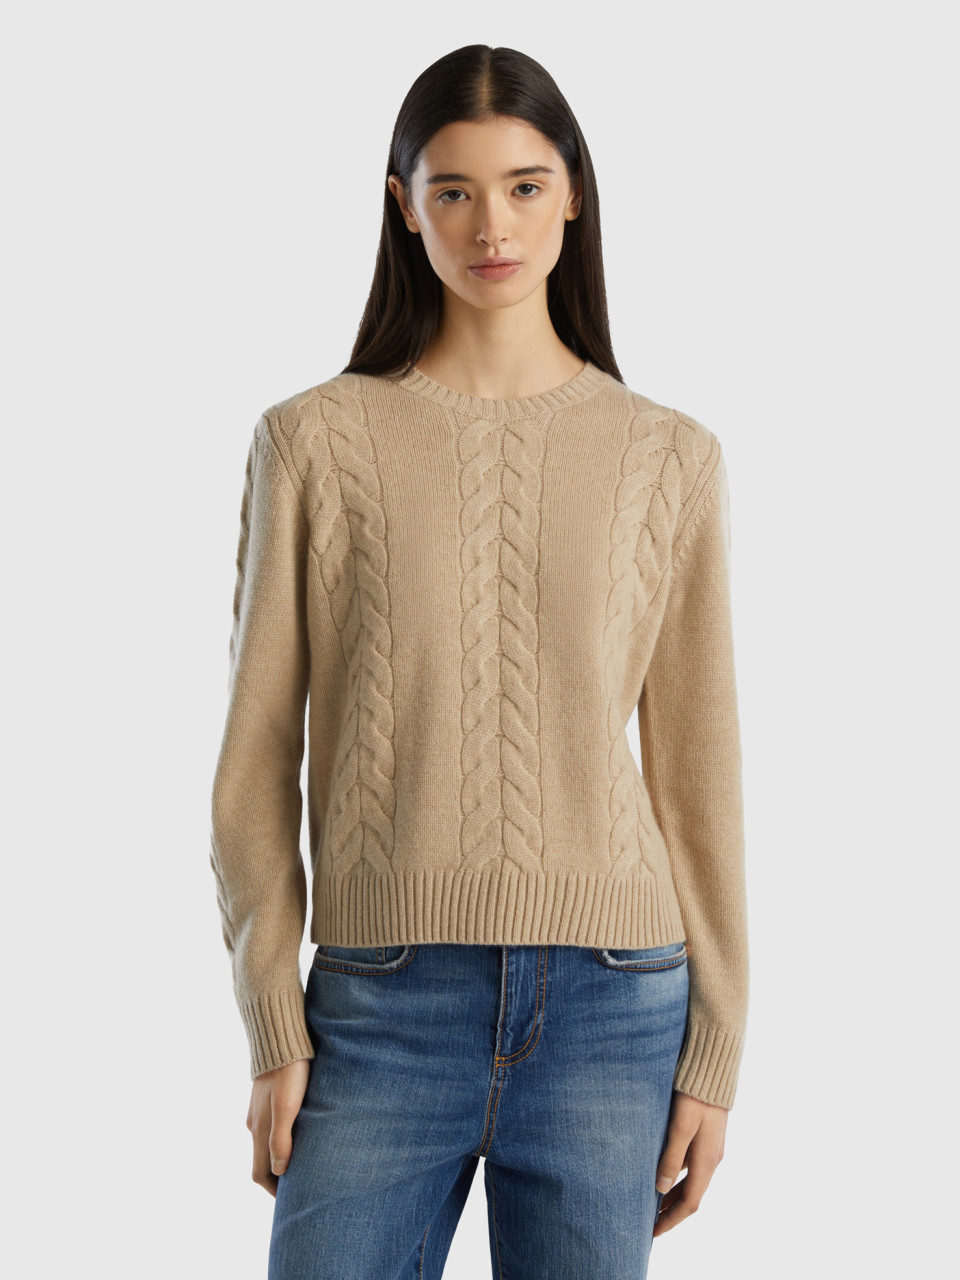 Benetton, Cable Knit Sweater In Pure Cashmere, Beige, Women